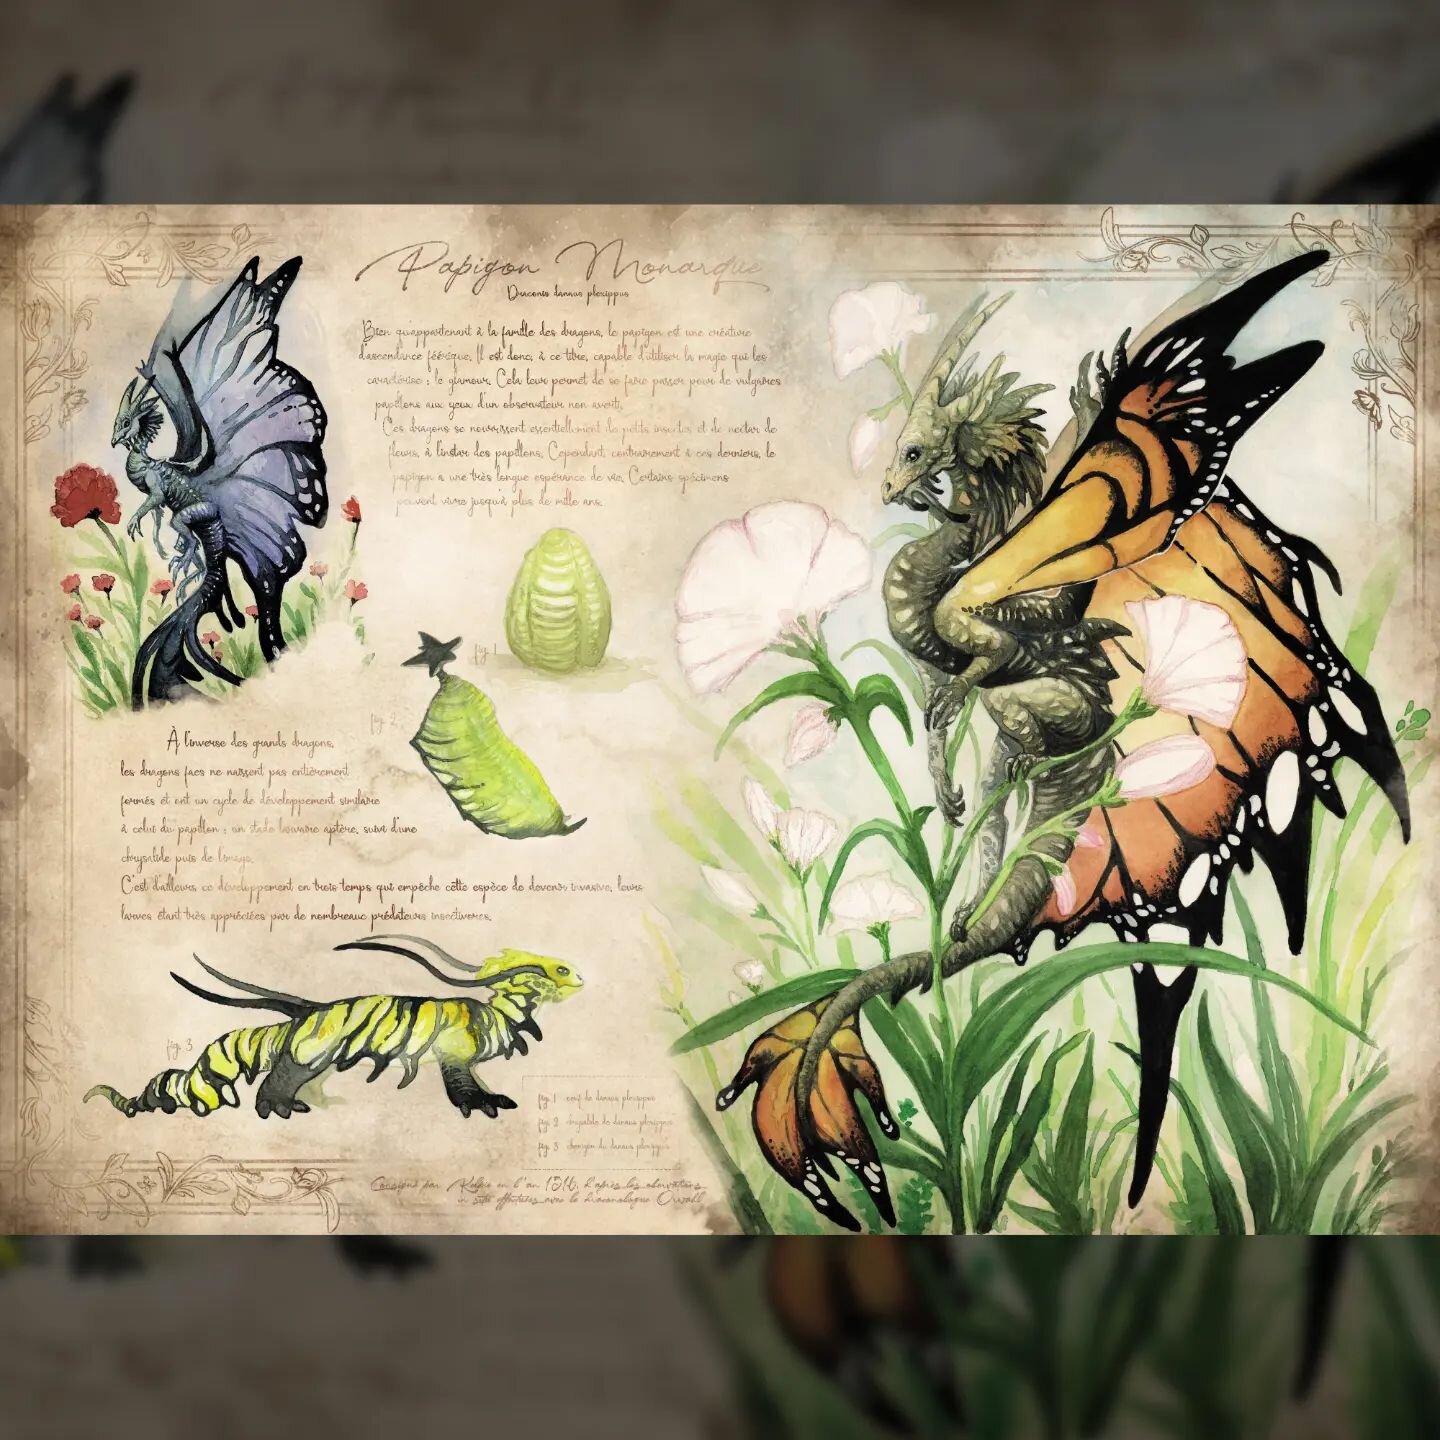 🦋monarch🦋
🇨🇵 Je reprends enfin la mise en page de mon bestiaire qui sortira &agrave; la fin de l'ann&eacute;e, j'ai h&acirc;te !
🇬🇧 It's time to go back to the layout for my bestiary that will be edited later this year (in French, the English v